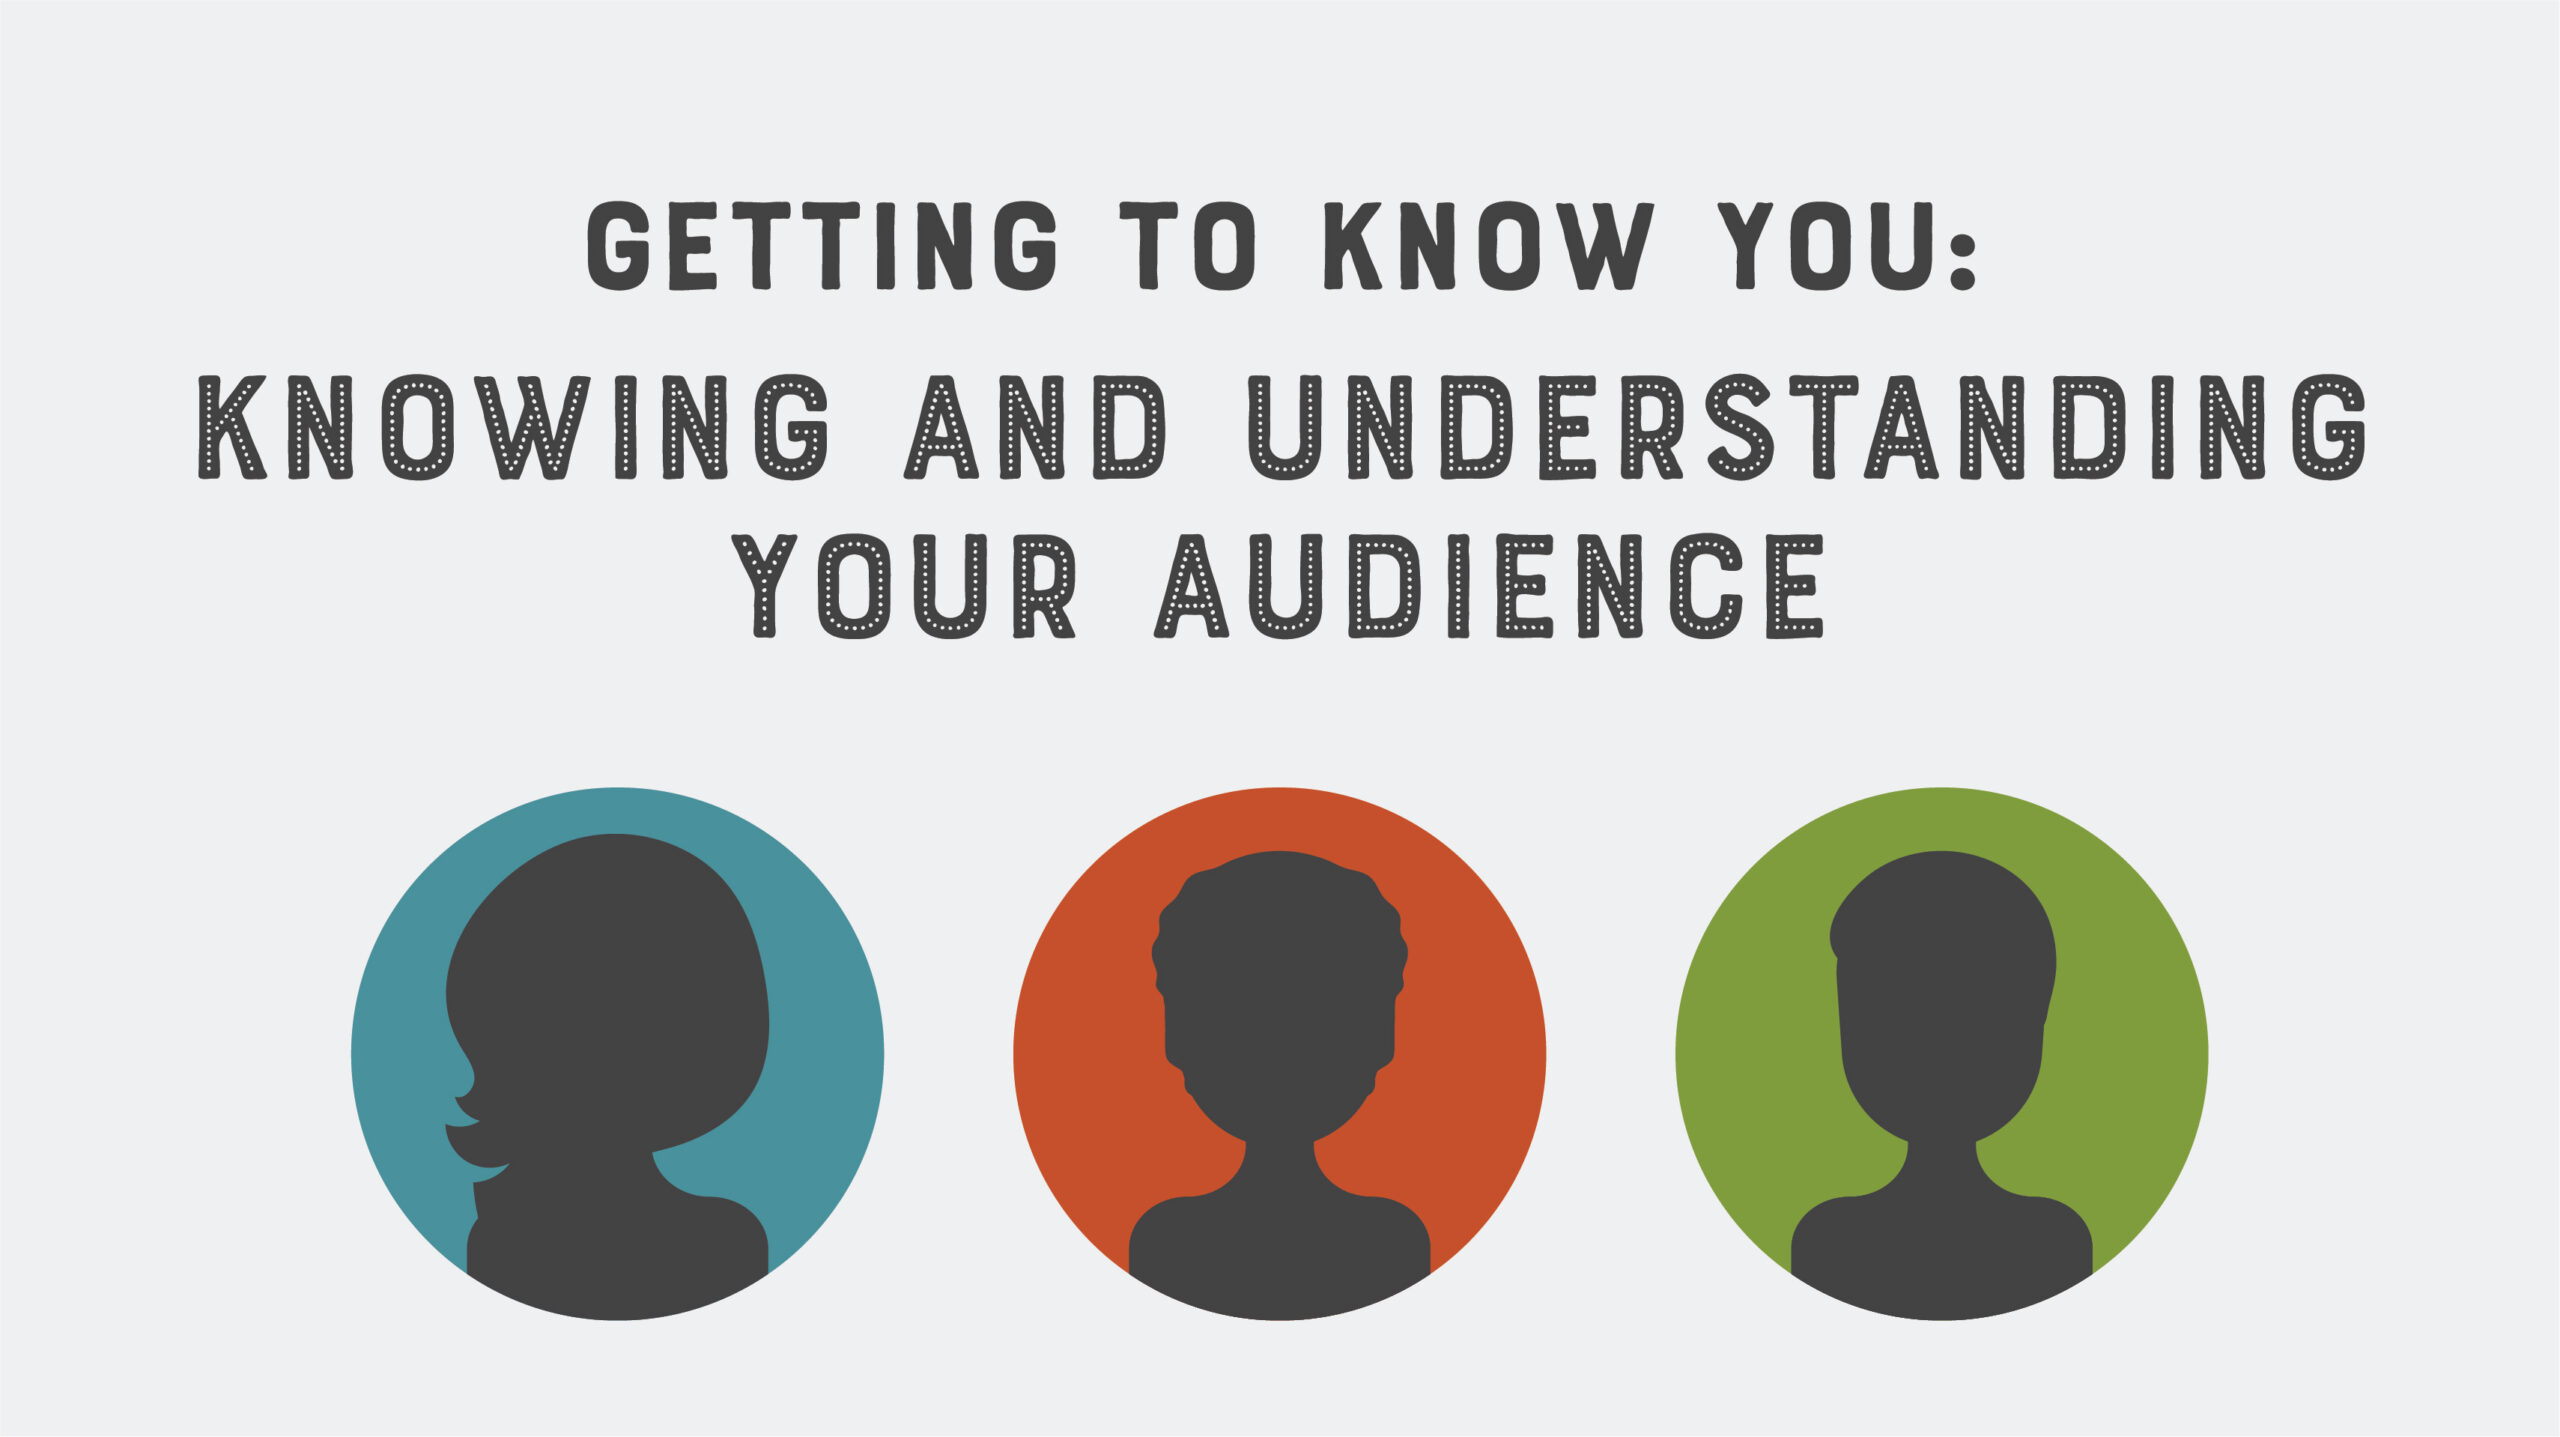 Knowing and understanding your audience